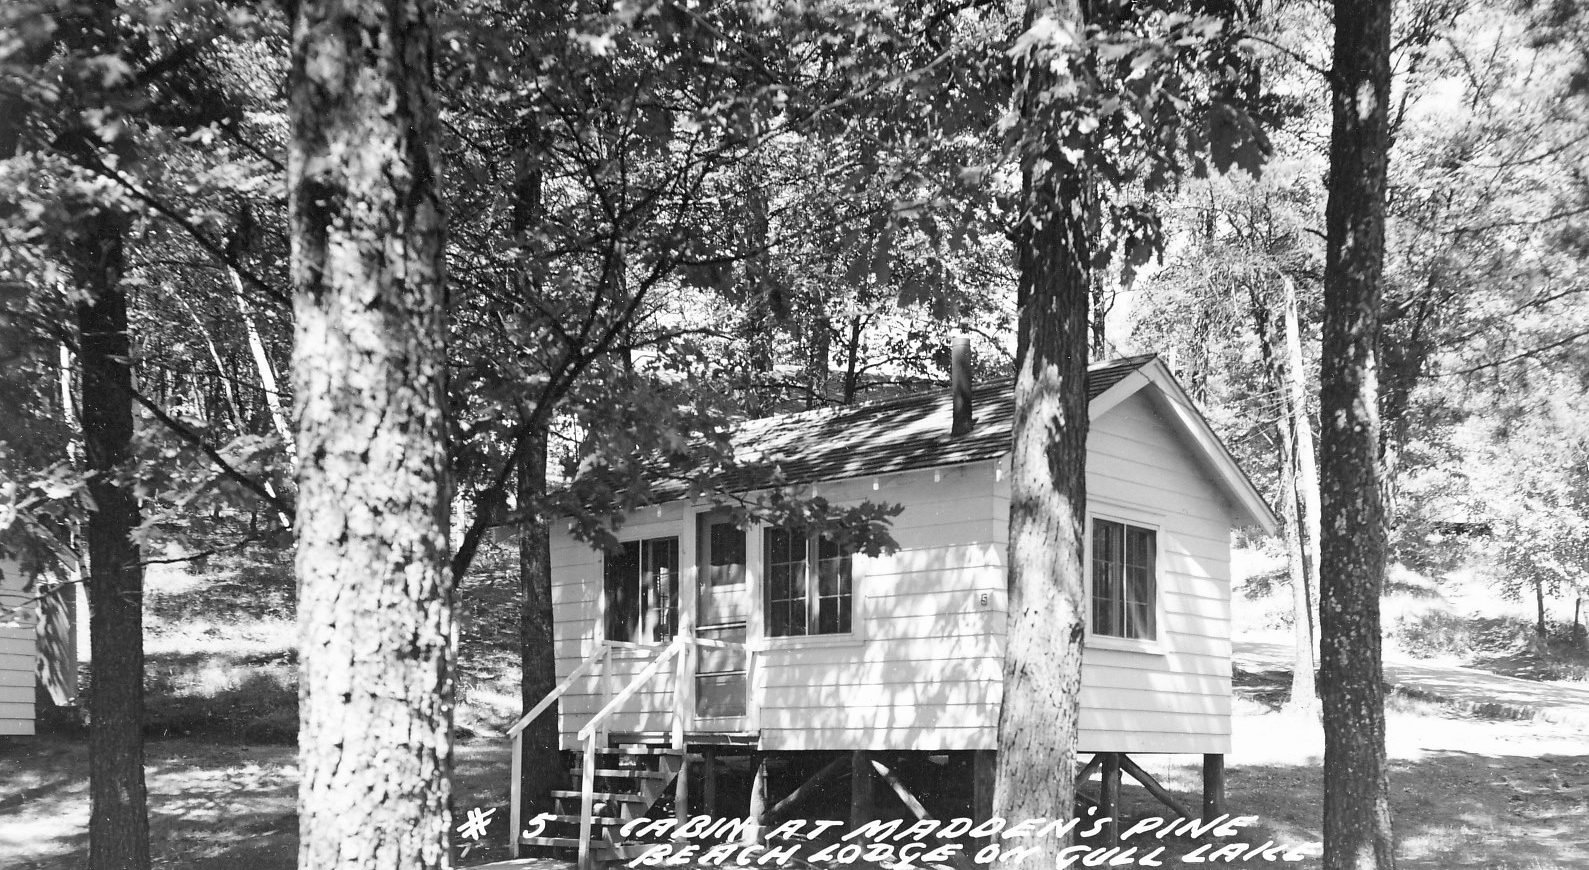 Madden's Lodge Cabins